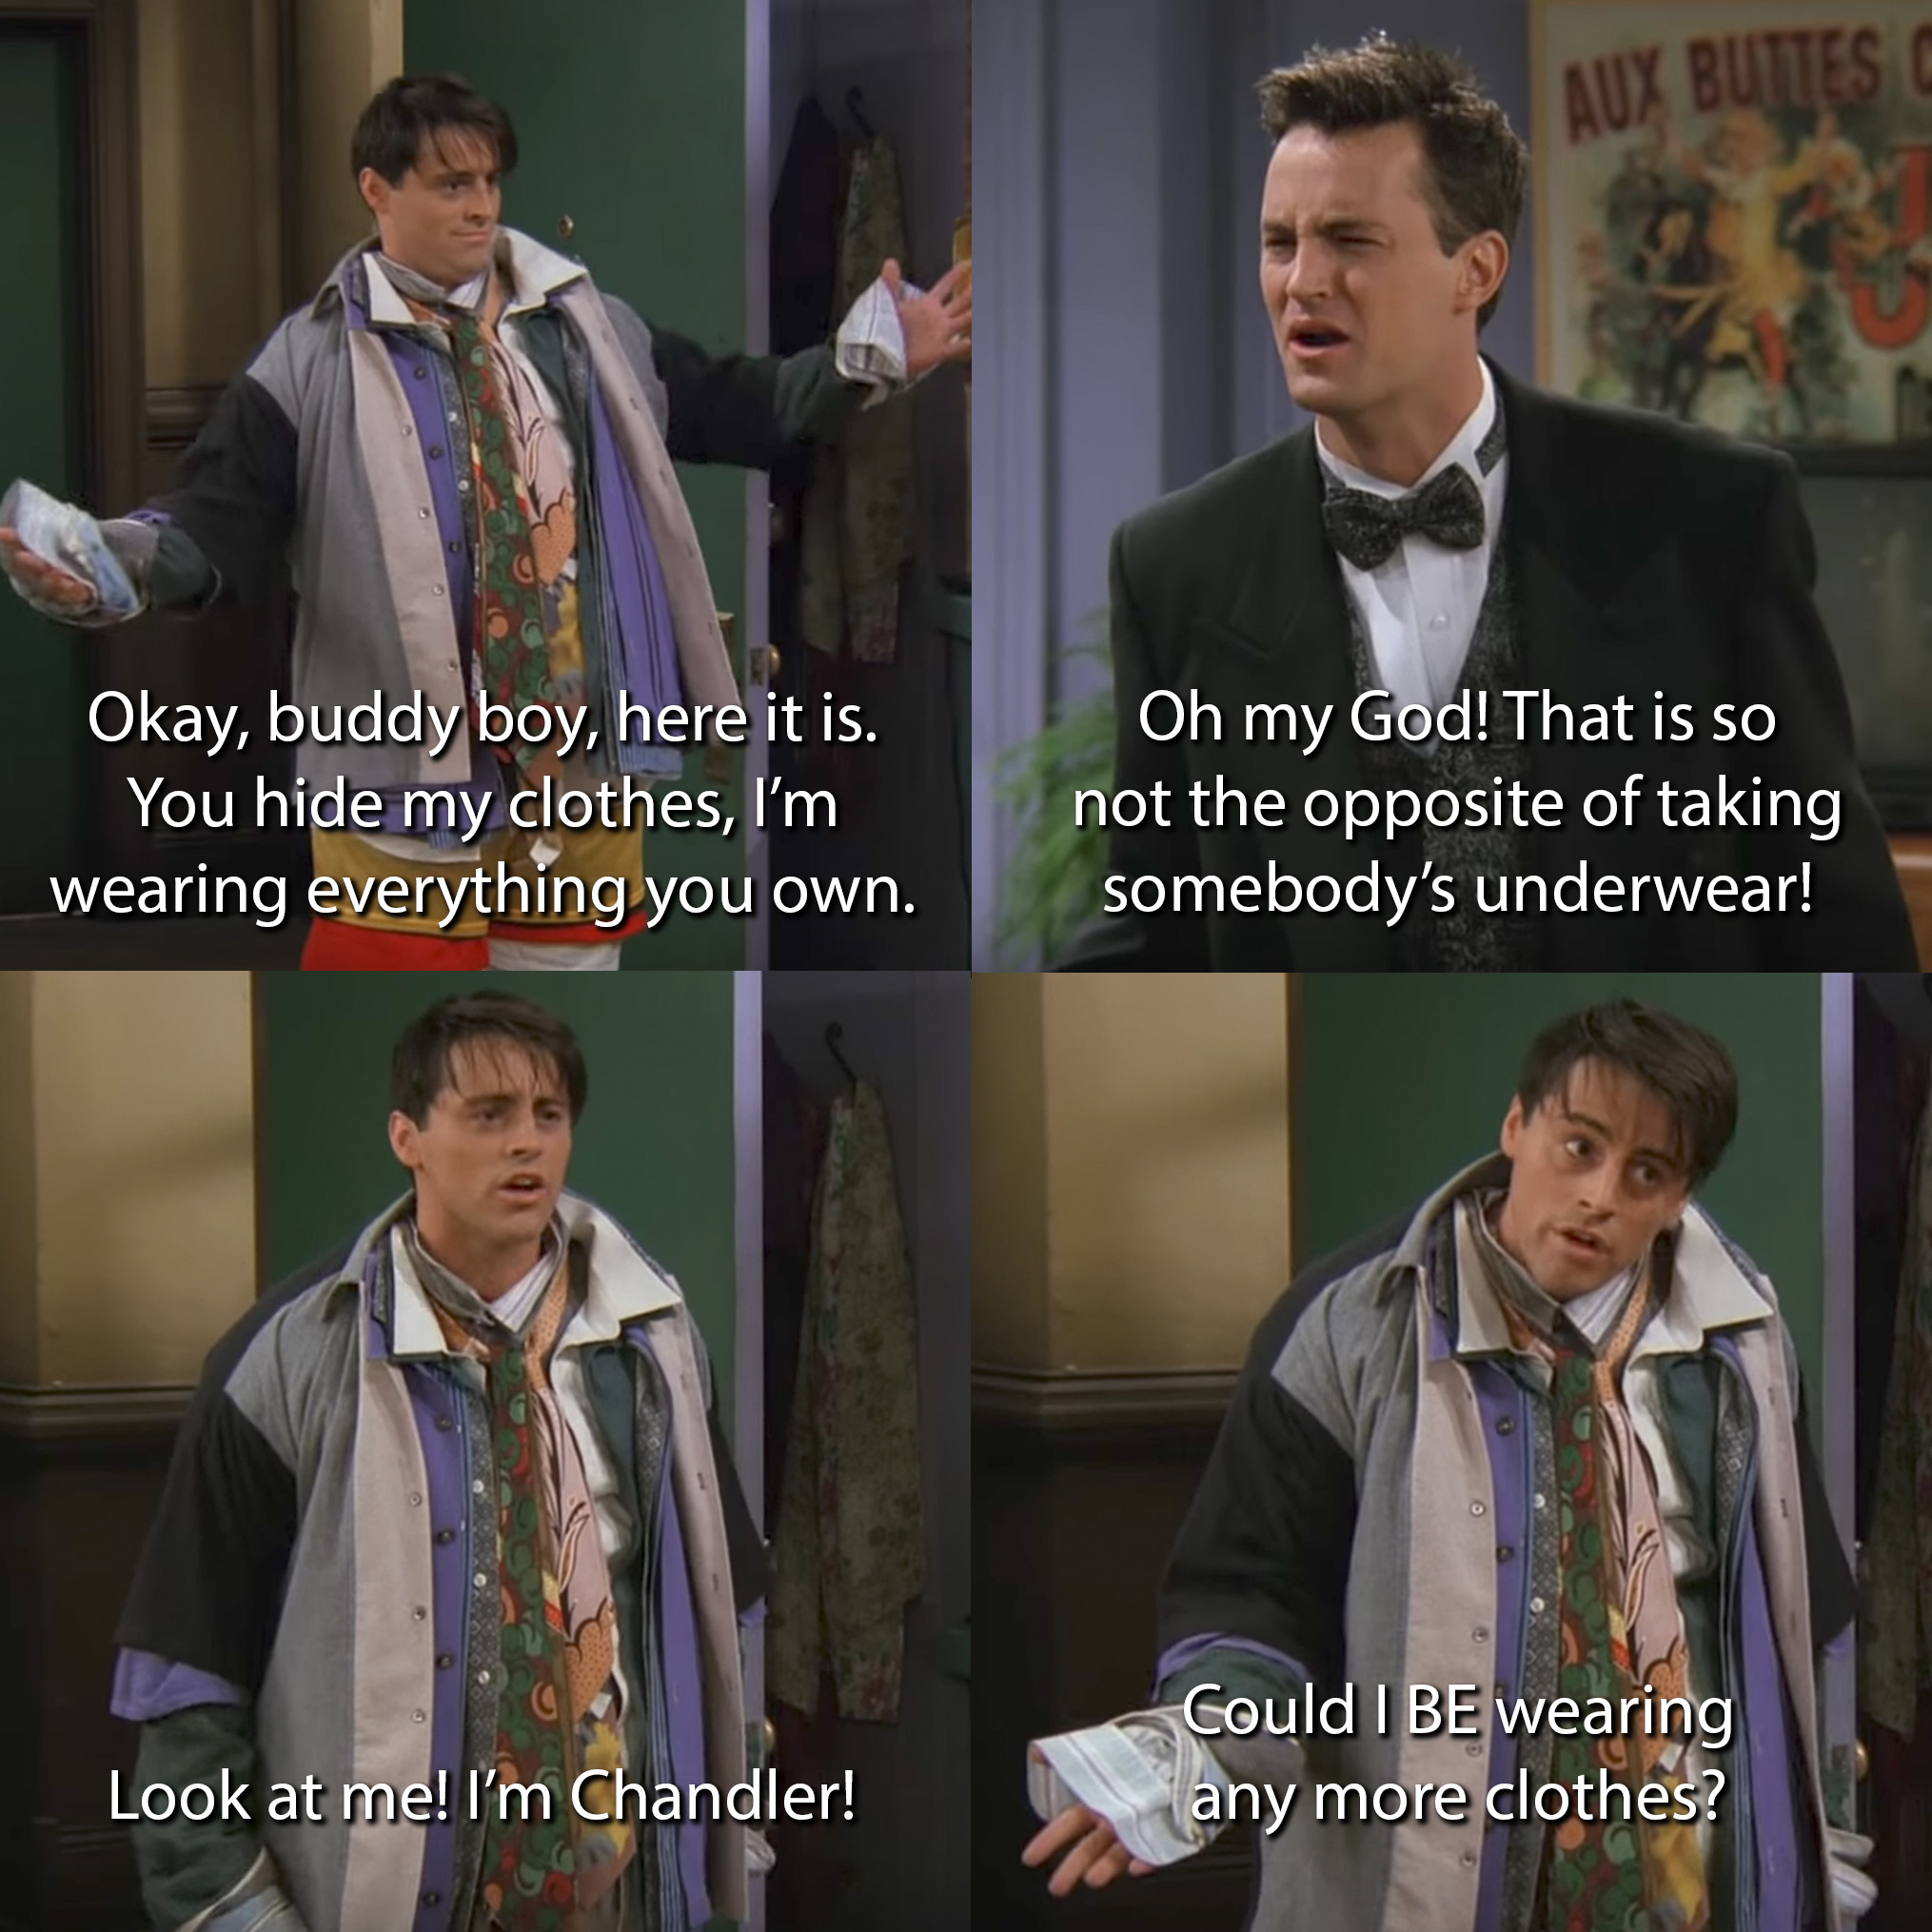 joey-funny-quote